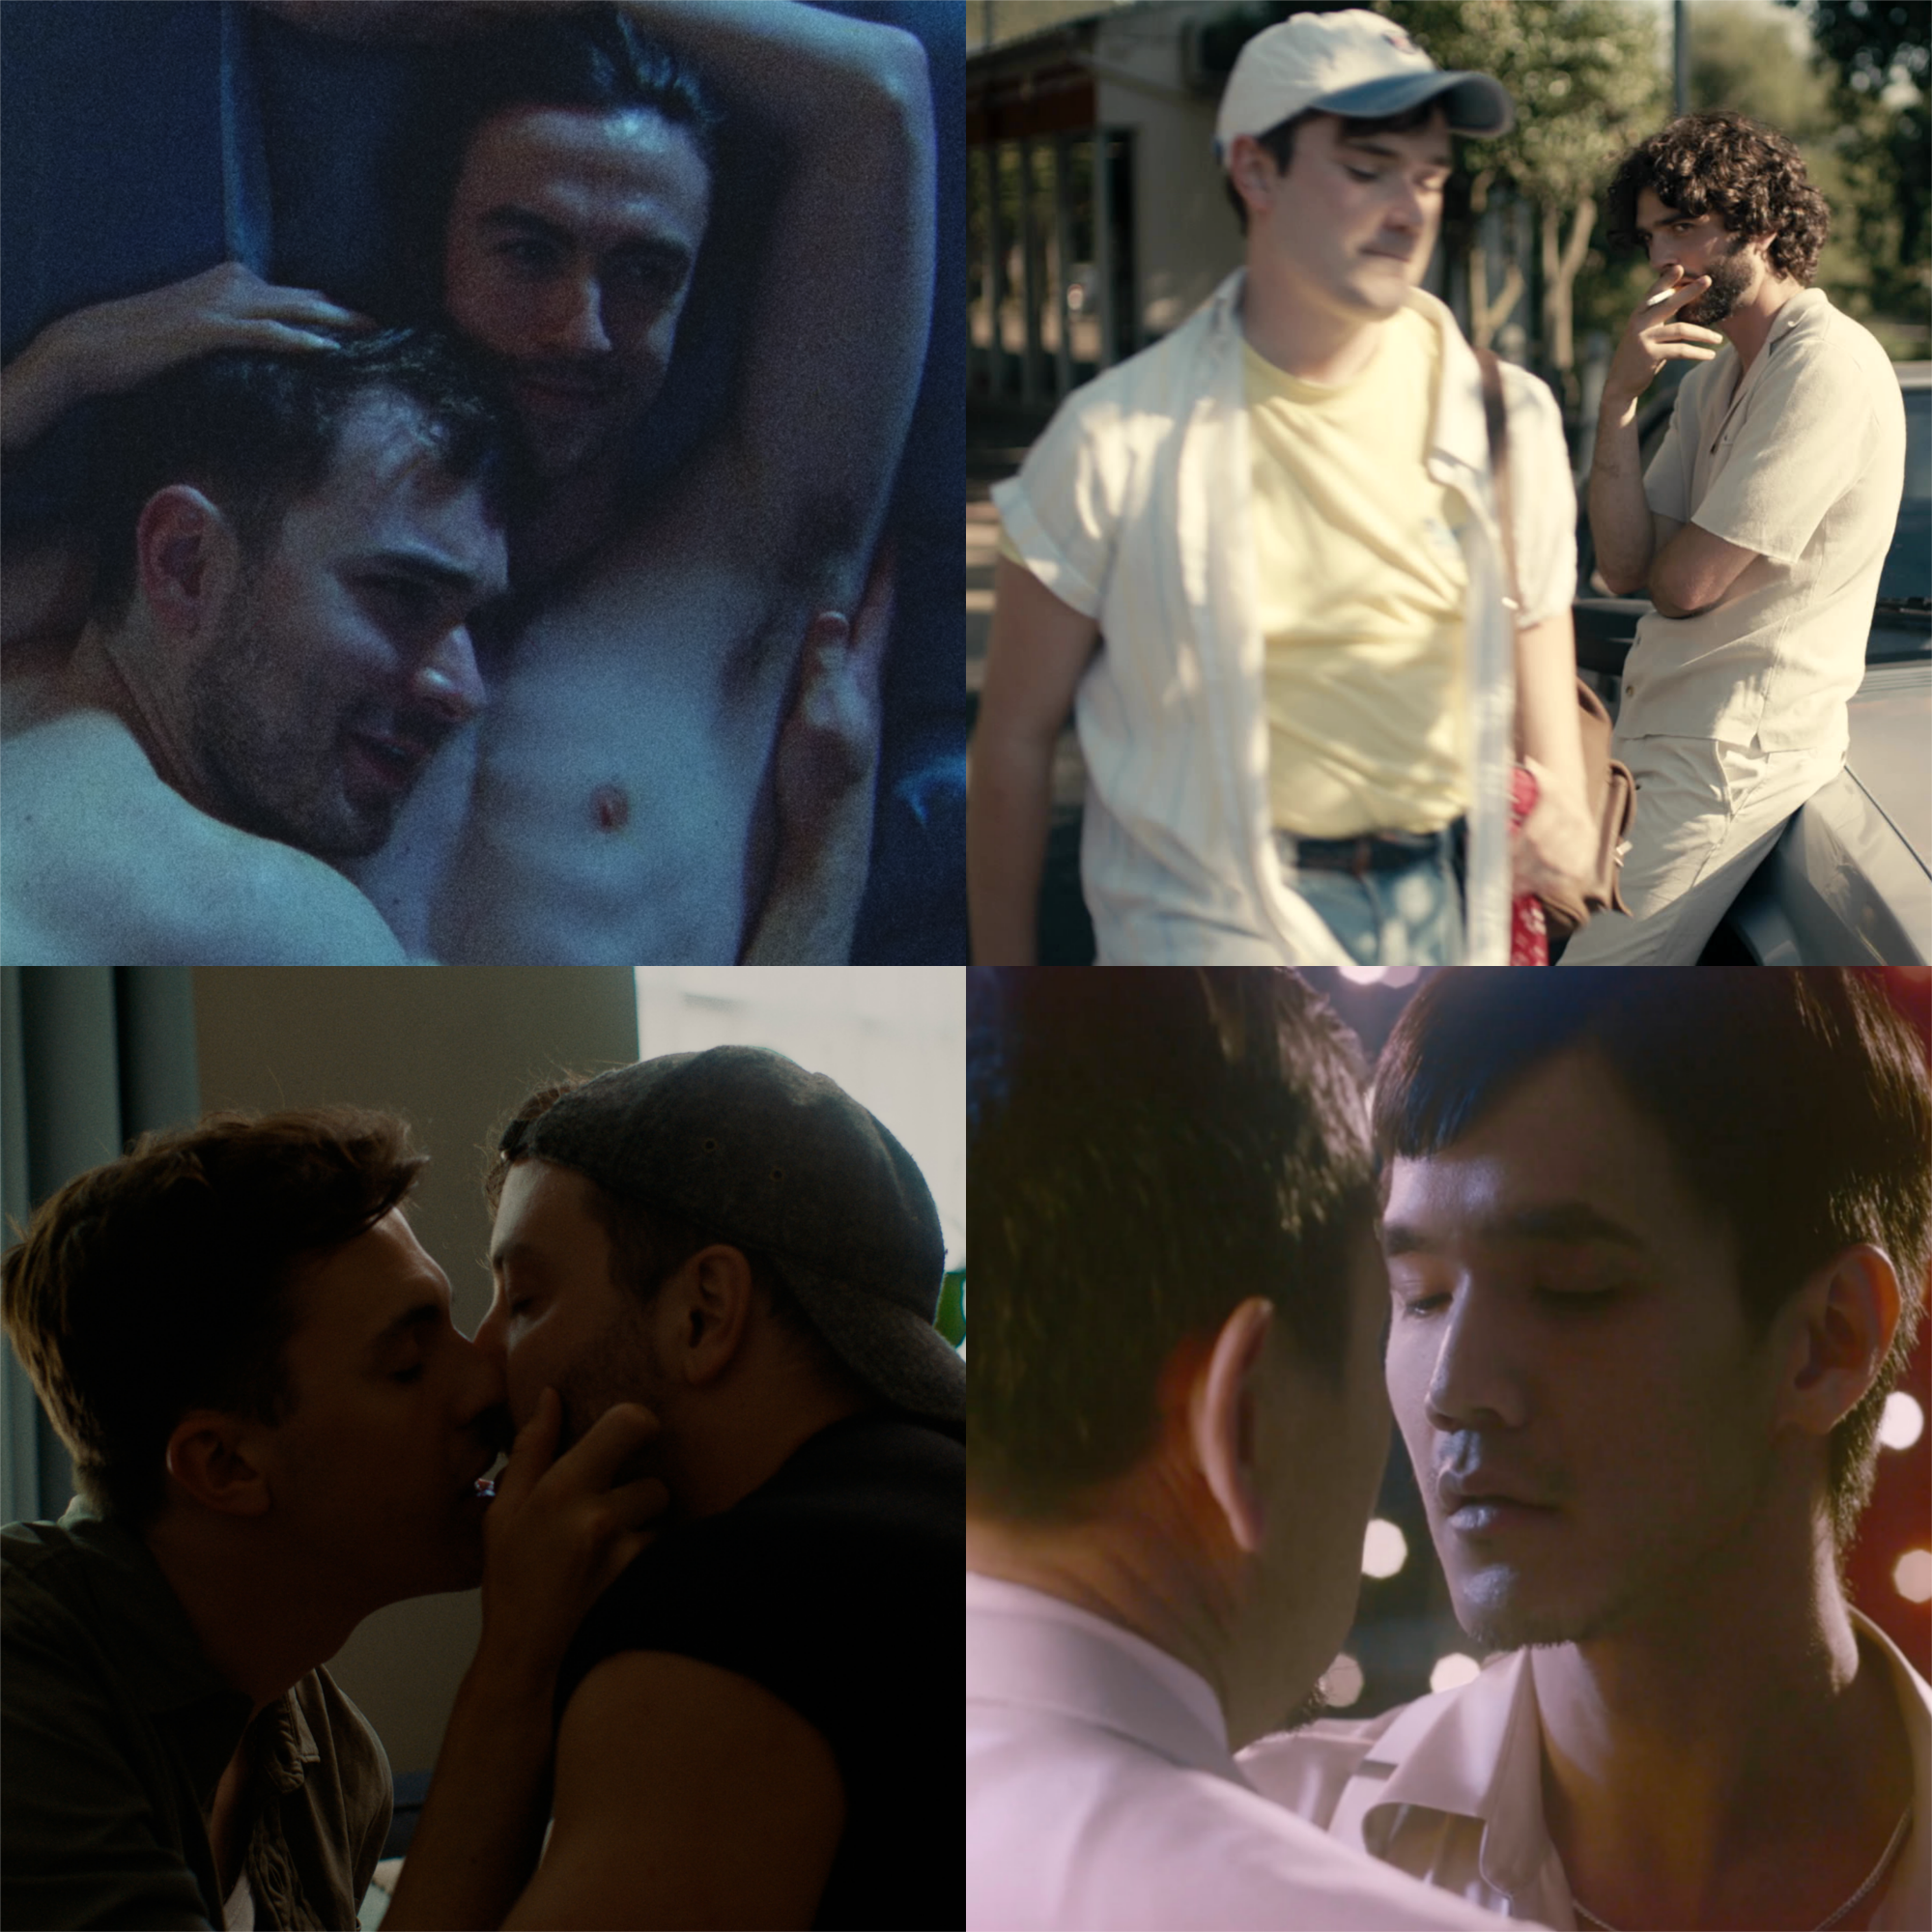 A collage of images: two shirtless men lying in bed, a man leaning on a car checking out another man walking past, two men kissing passionately, and two men slow dancing.